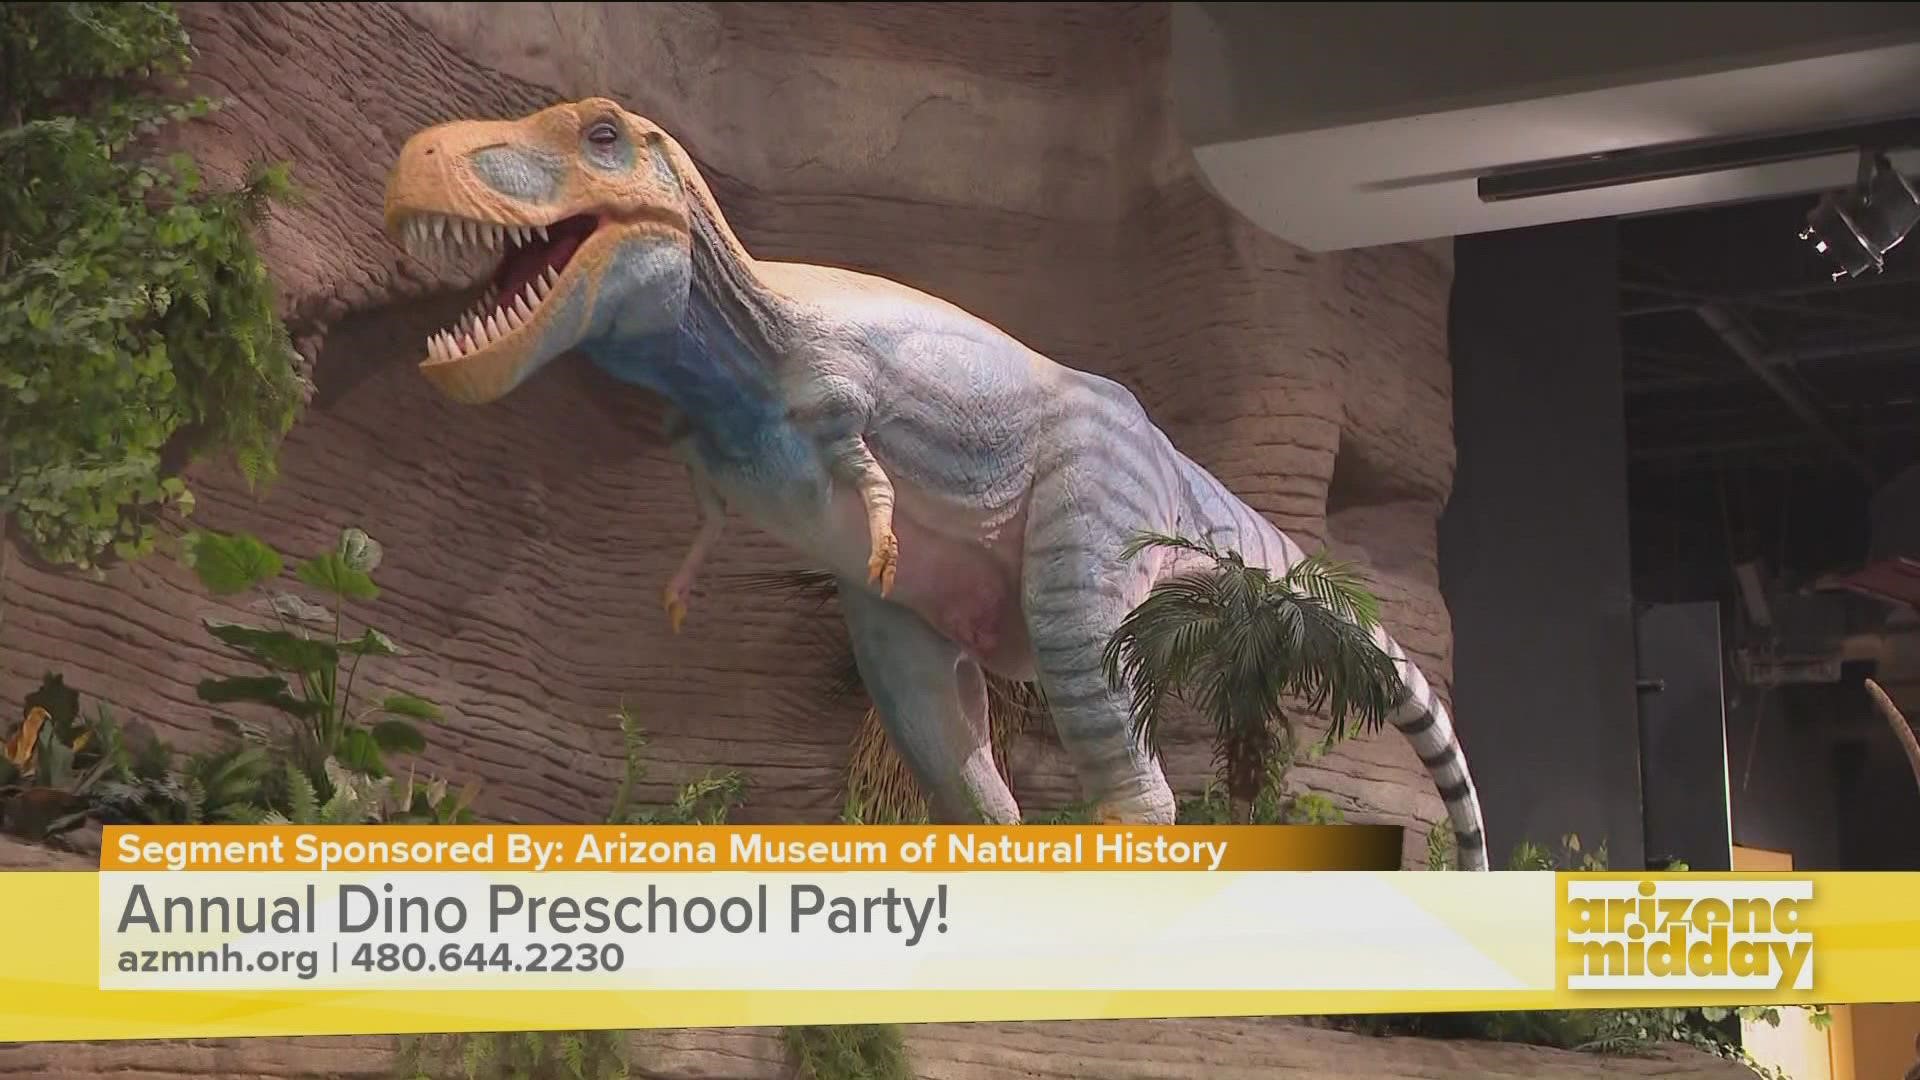 Museum Educator Ali Smurawa gives the details on this fun event where your youngsters can celebrate their love of all things dinosaur. And the best part...it's free!